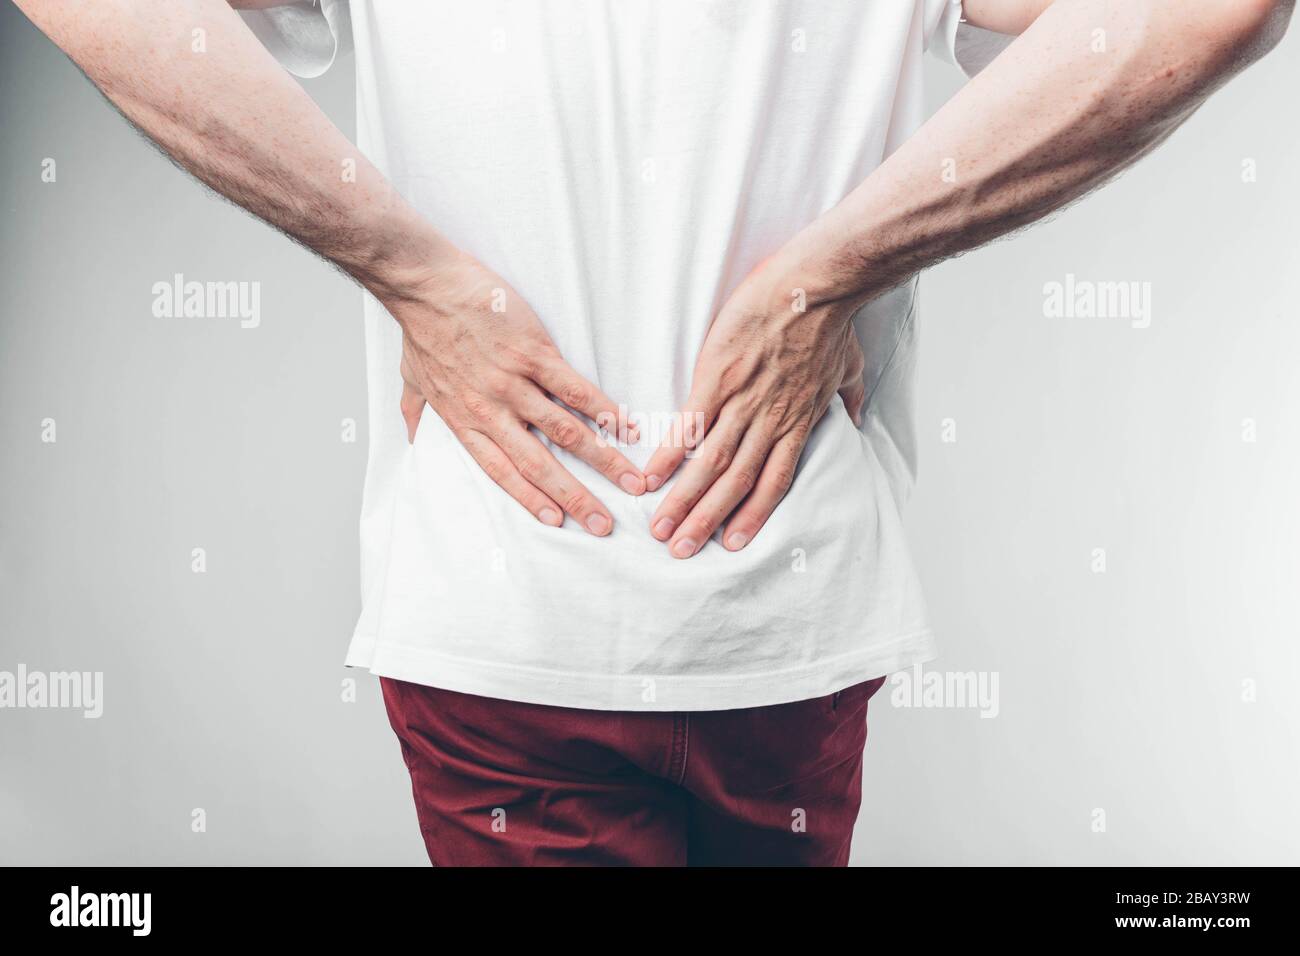 Caucasian Man in White T-shirt and Burgundy Pants. Holding His Hands on  Stomach. Cut View. Concept Stock Image - Image of discomfort, hand:  177276149